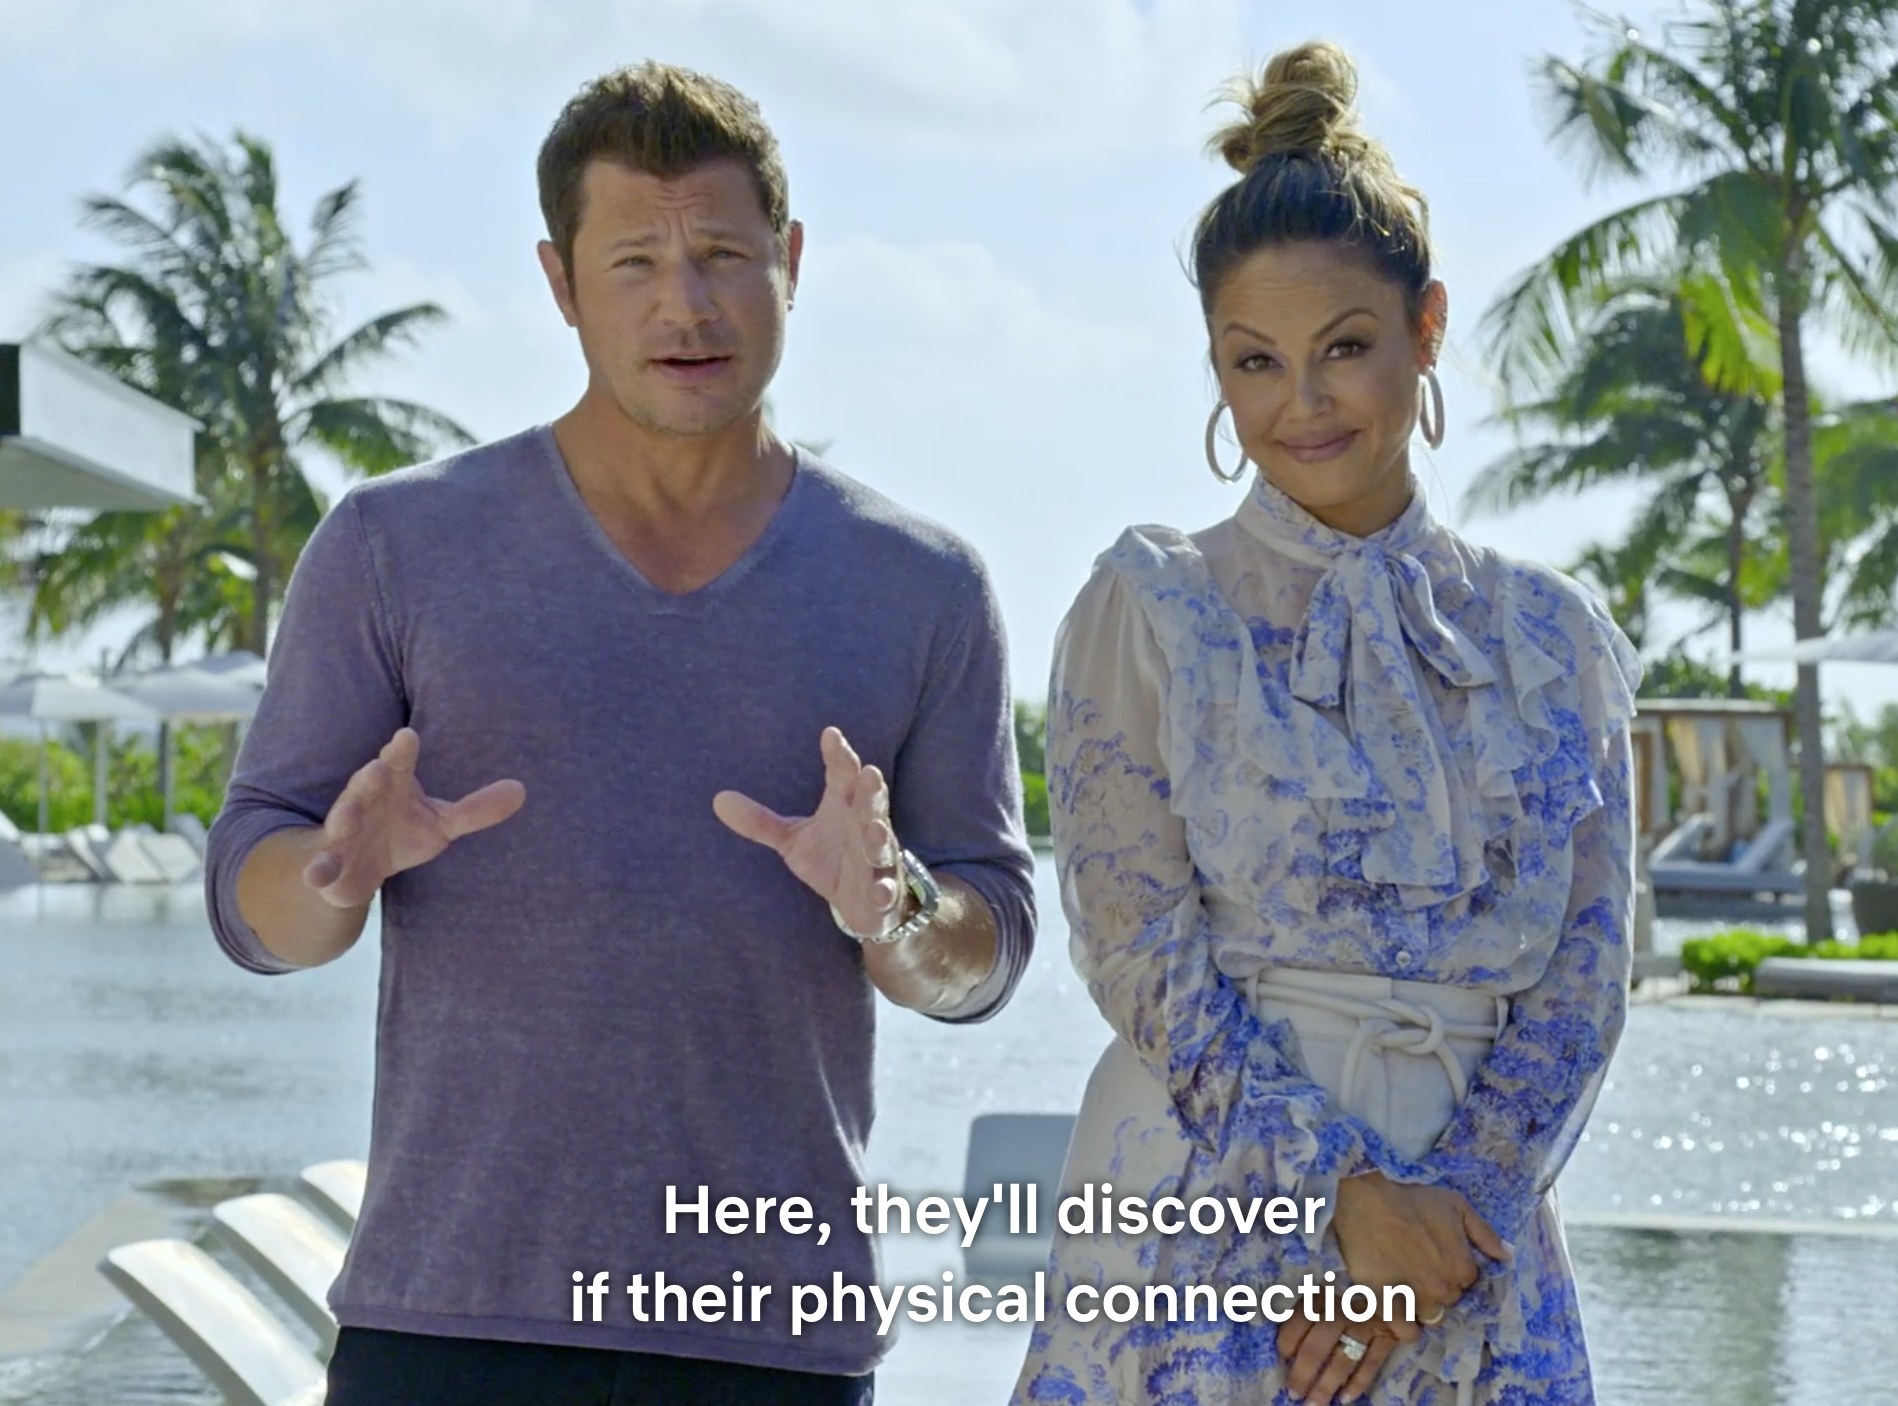 Nick Lachey stand next to his wife Vanessa in Mexico and says &quot;Here, they&#x27;ll discover if their physical connection...&quot;